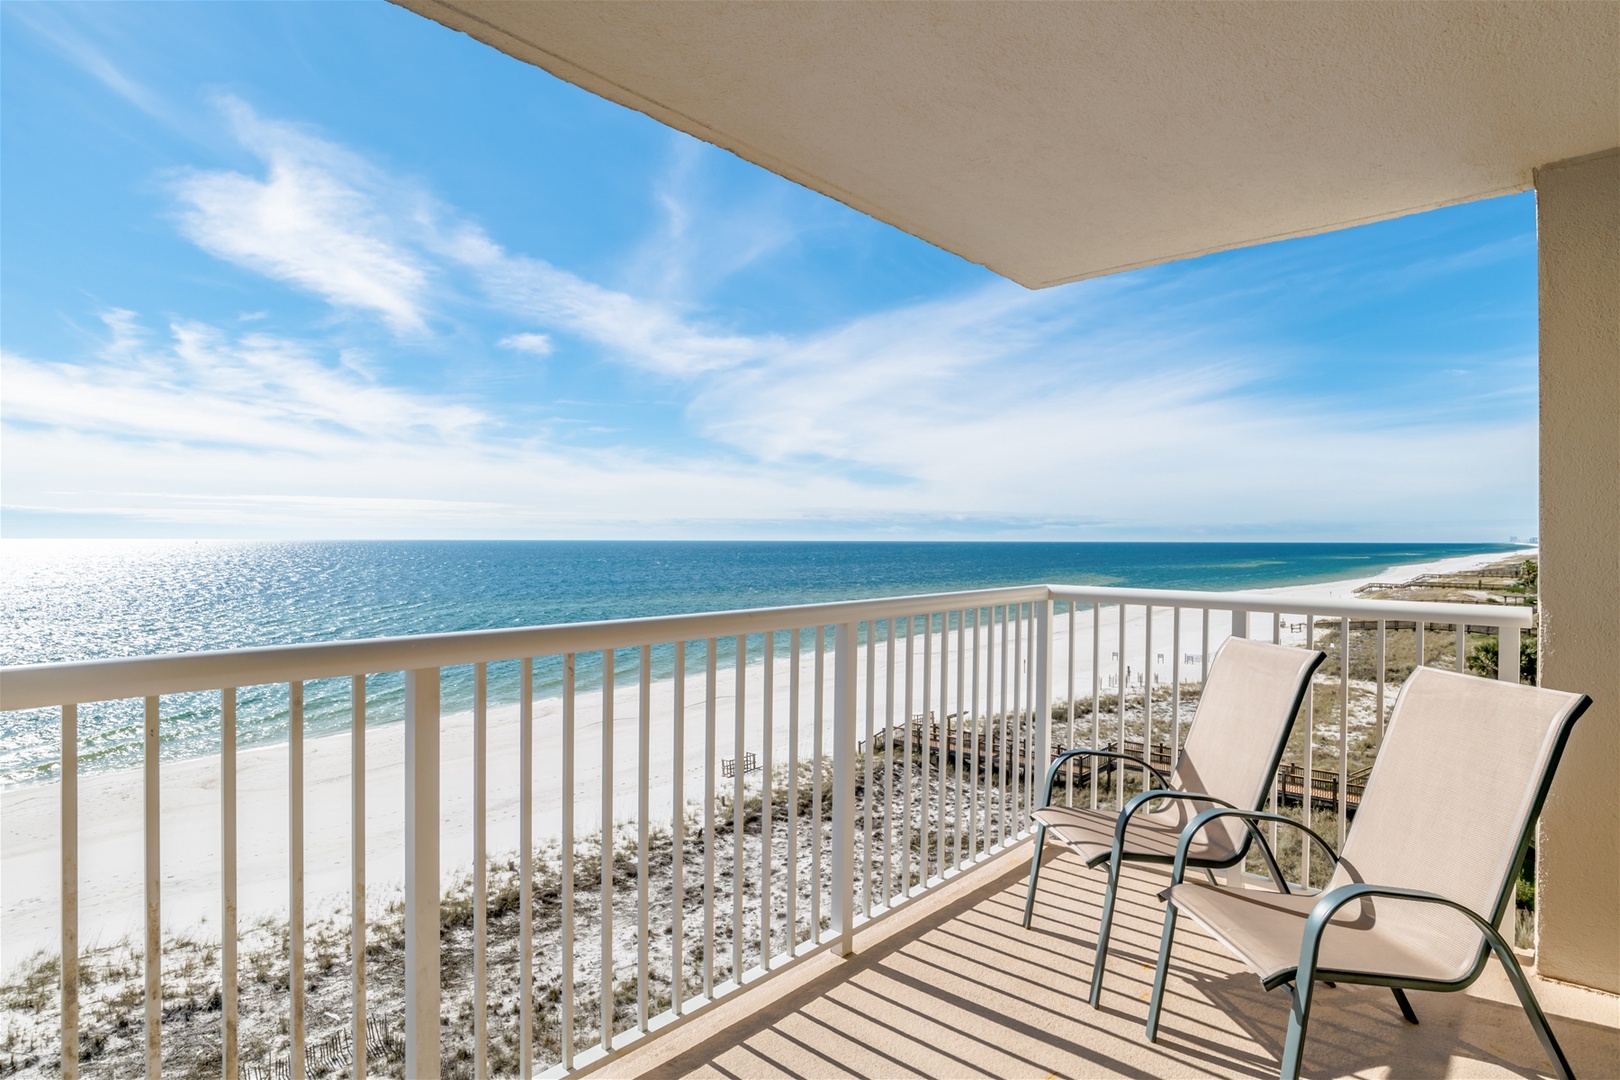 Sandy Key 638 Balcony with Expansive Views